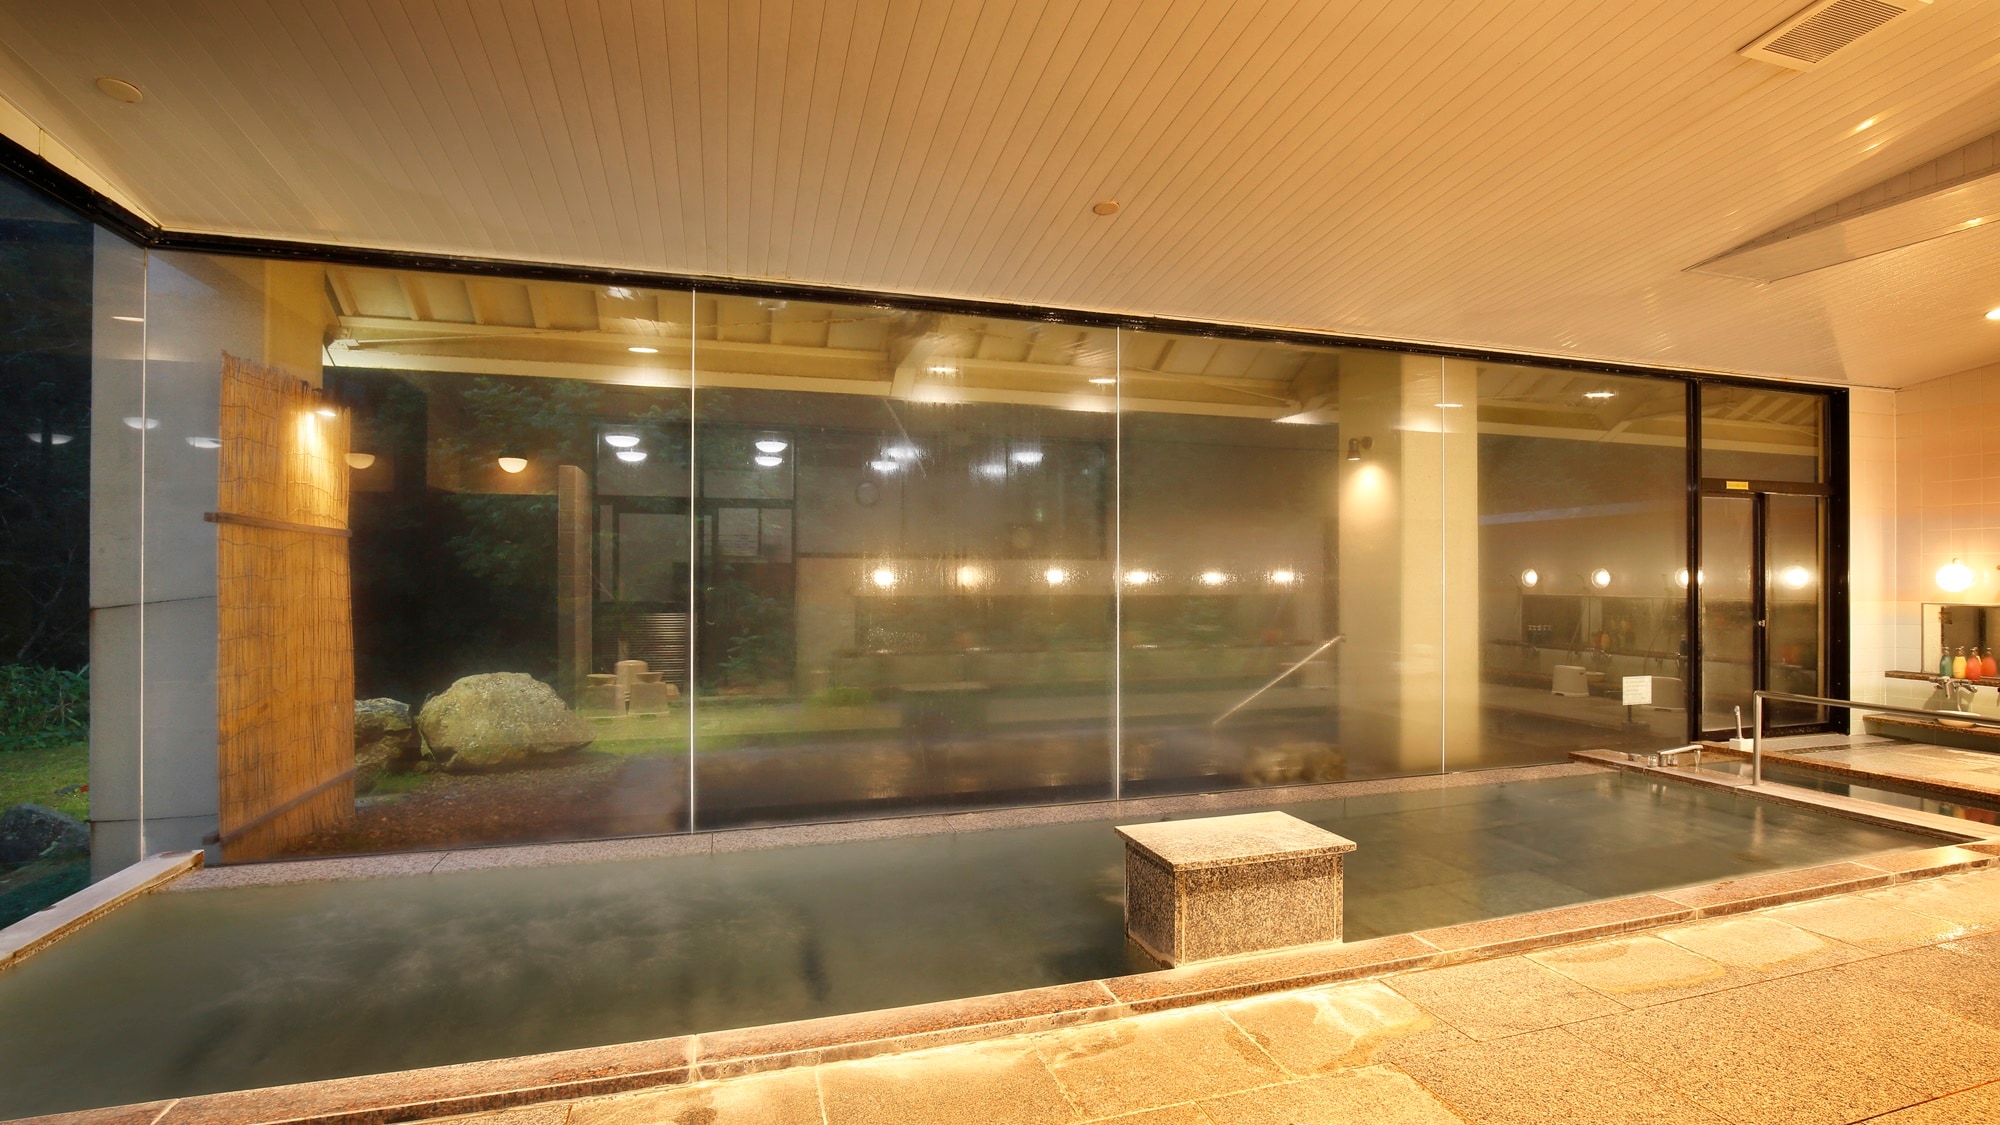 [Large communal bath with a view] Relax in the large communal bath with a sense of openness, with glass on one side.